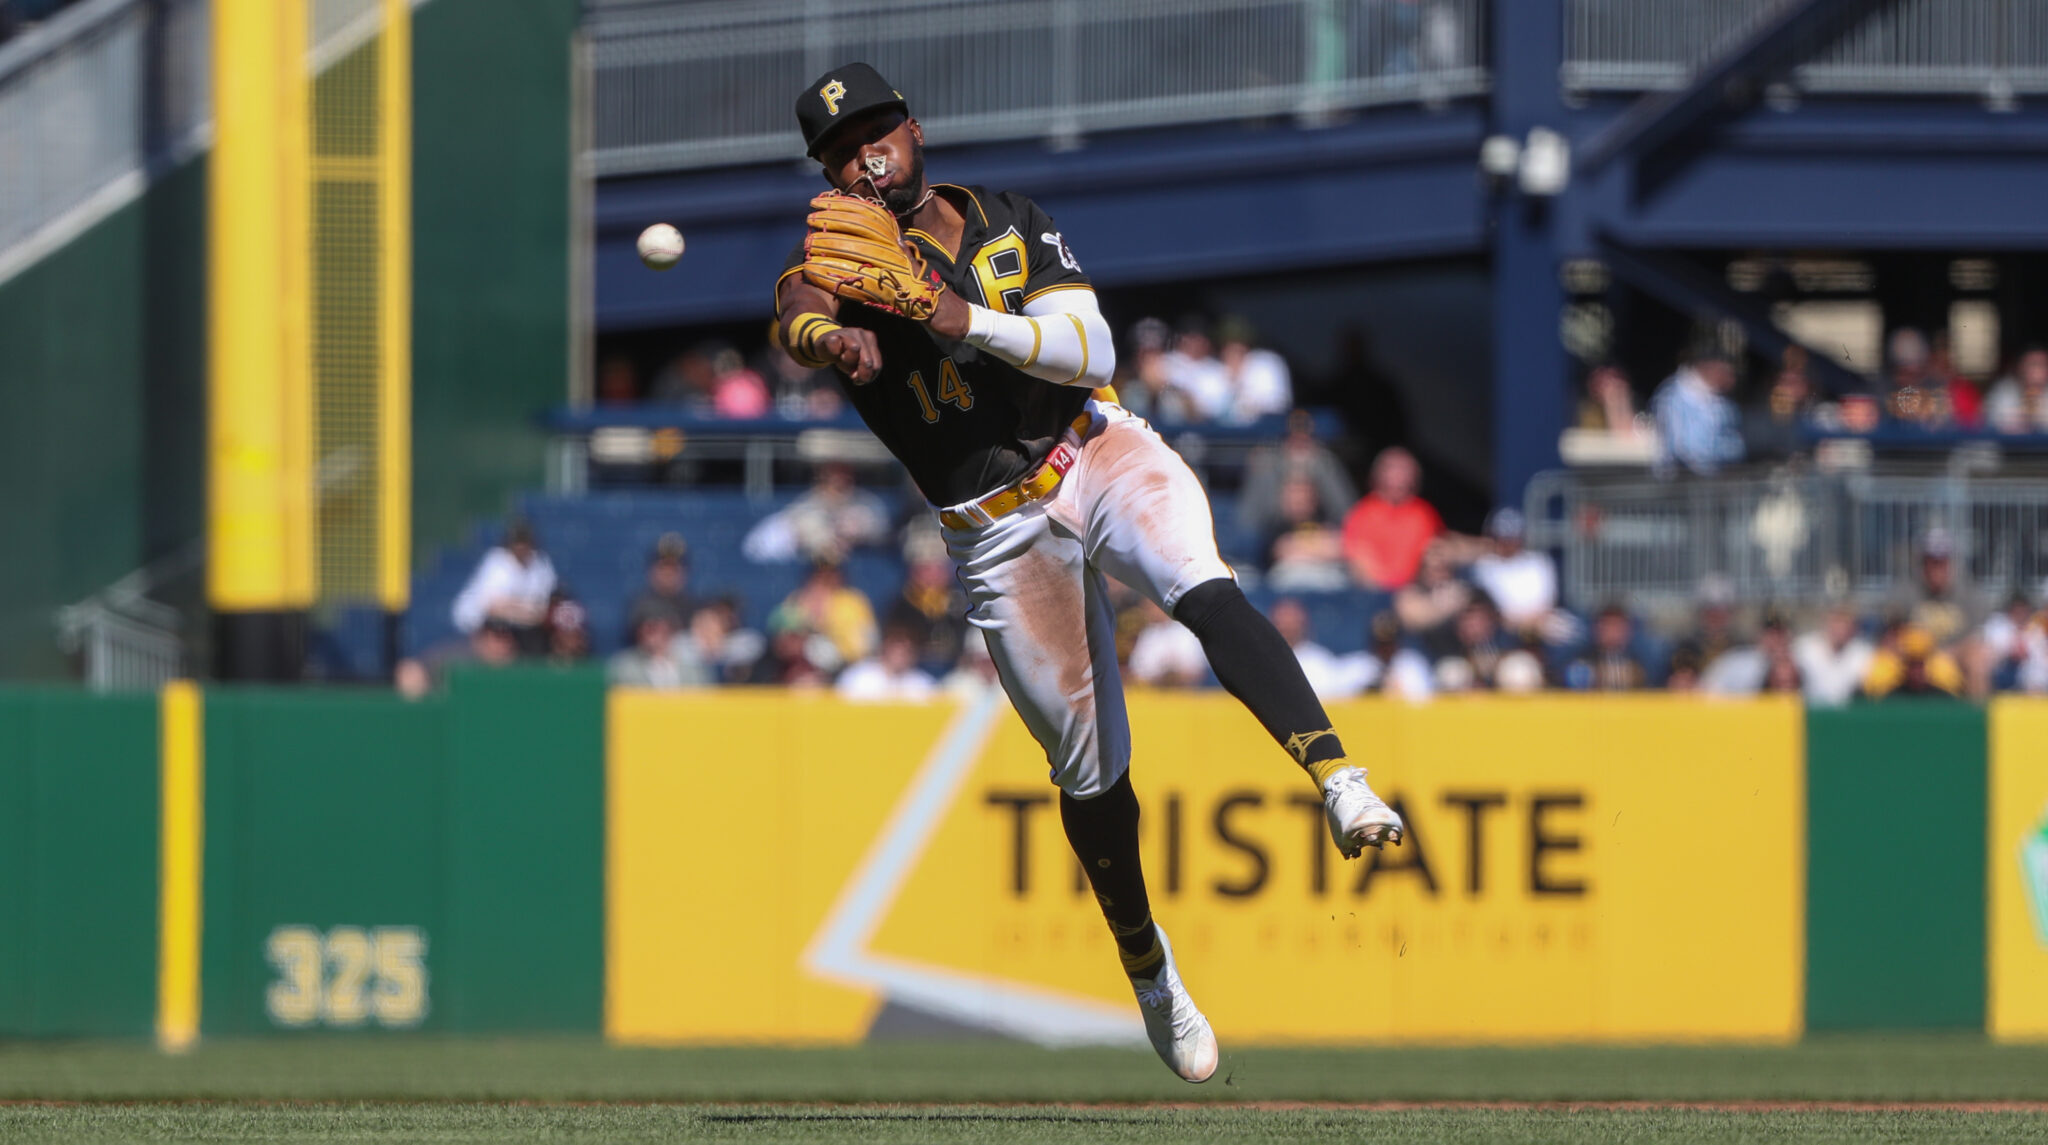 All you need to know about Pittsburgh Pirates' home run sword